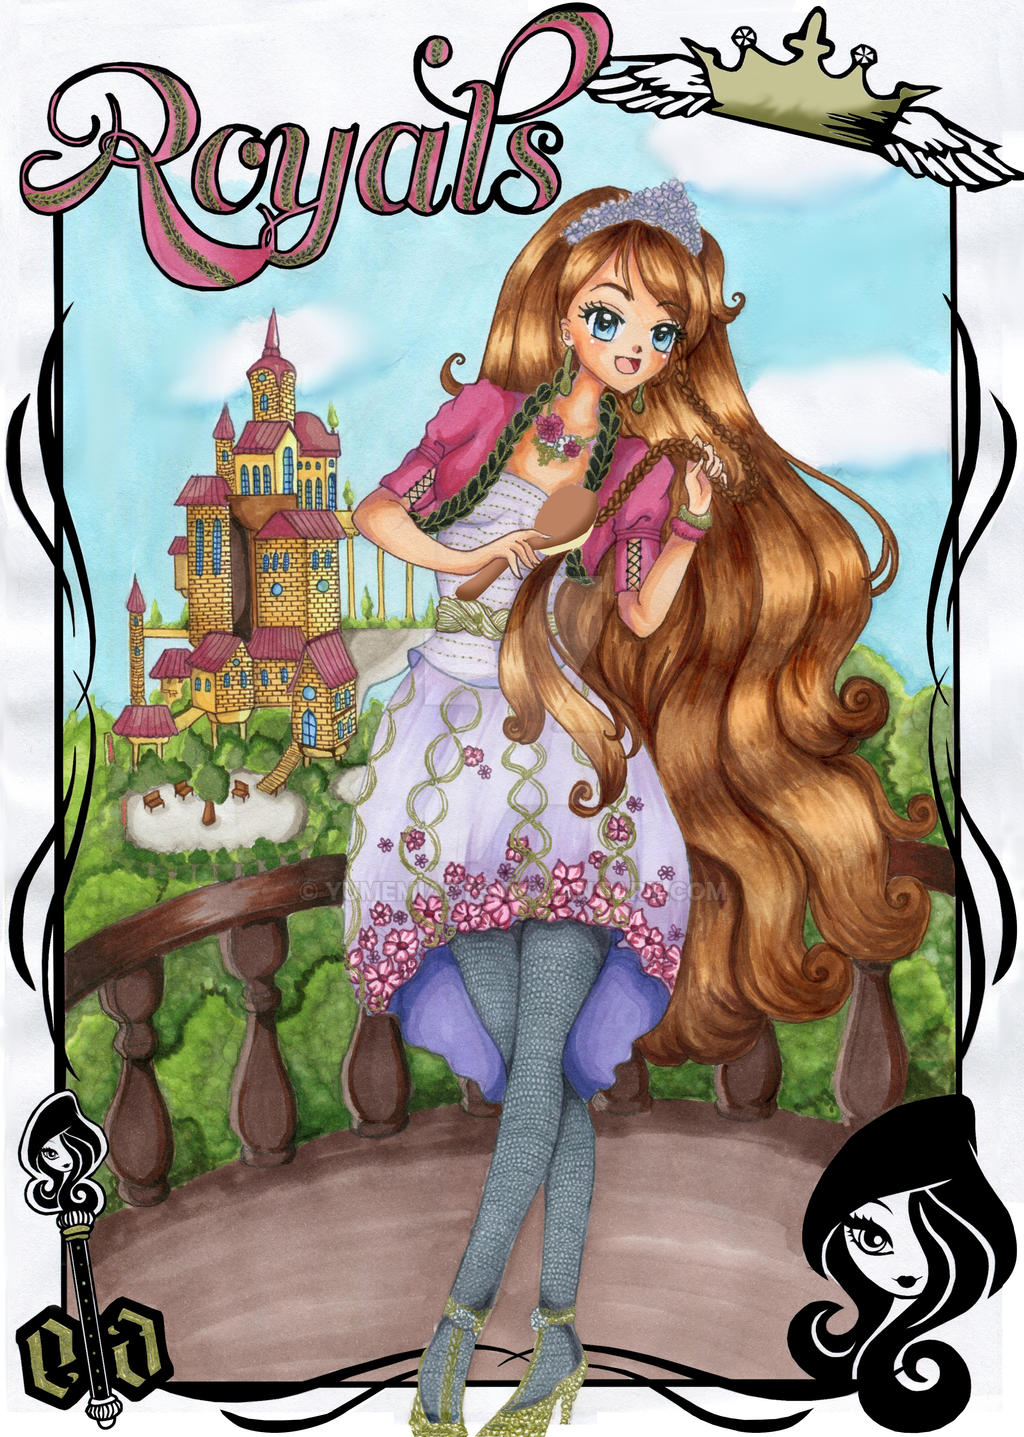 Holly O'Hair (Ever After High Fanart) by YumemiArts on DeviantArt